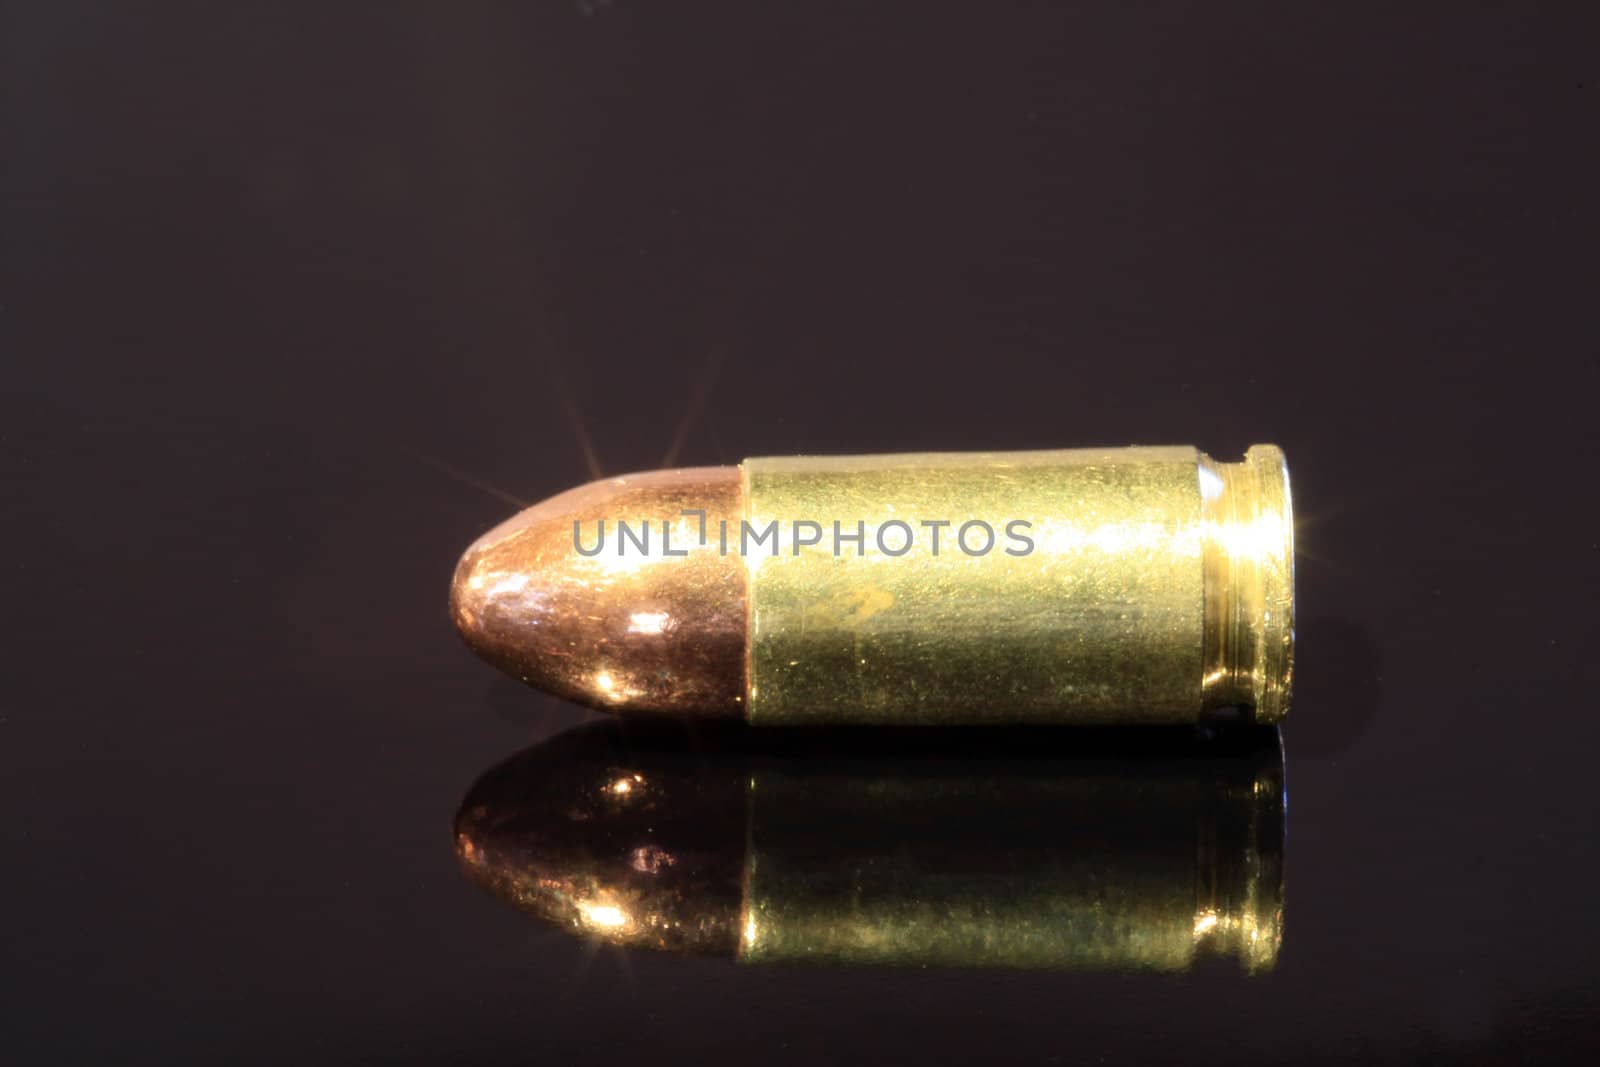 9mm bullet on black surface by ChrisAlleaume